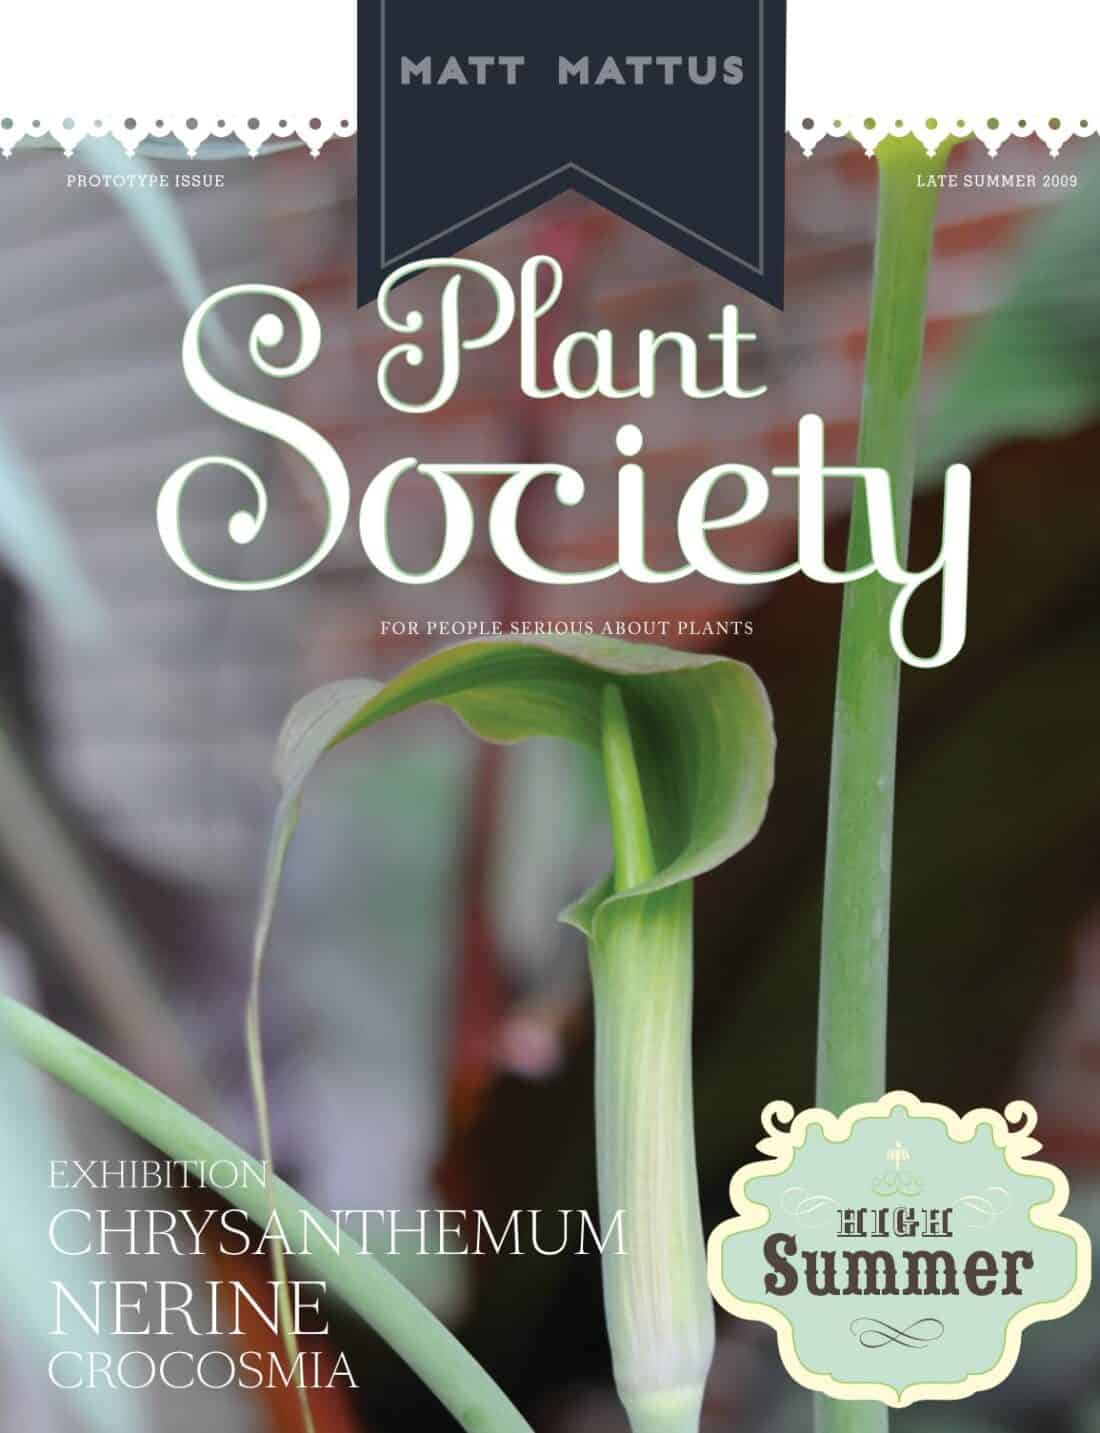 Cover of "plant society" magazine, prototype issue, late summer 2009, featuring articles about chrysanthemum and crocosmia.